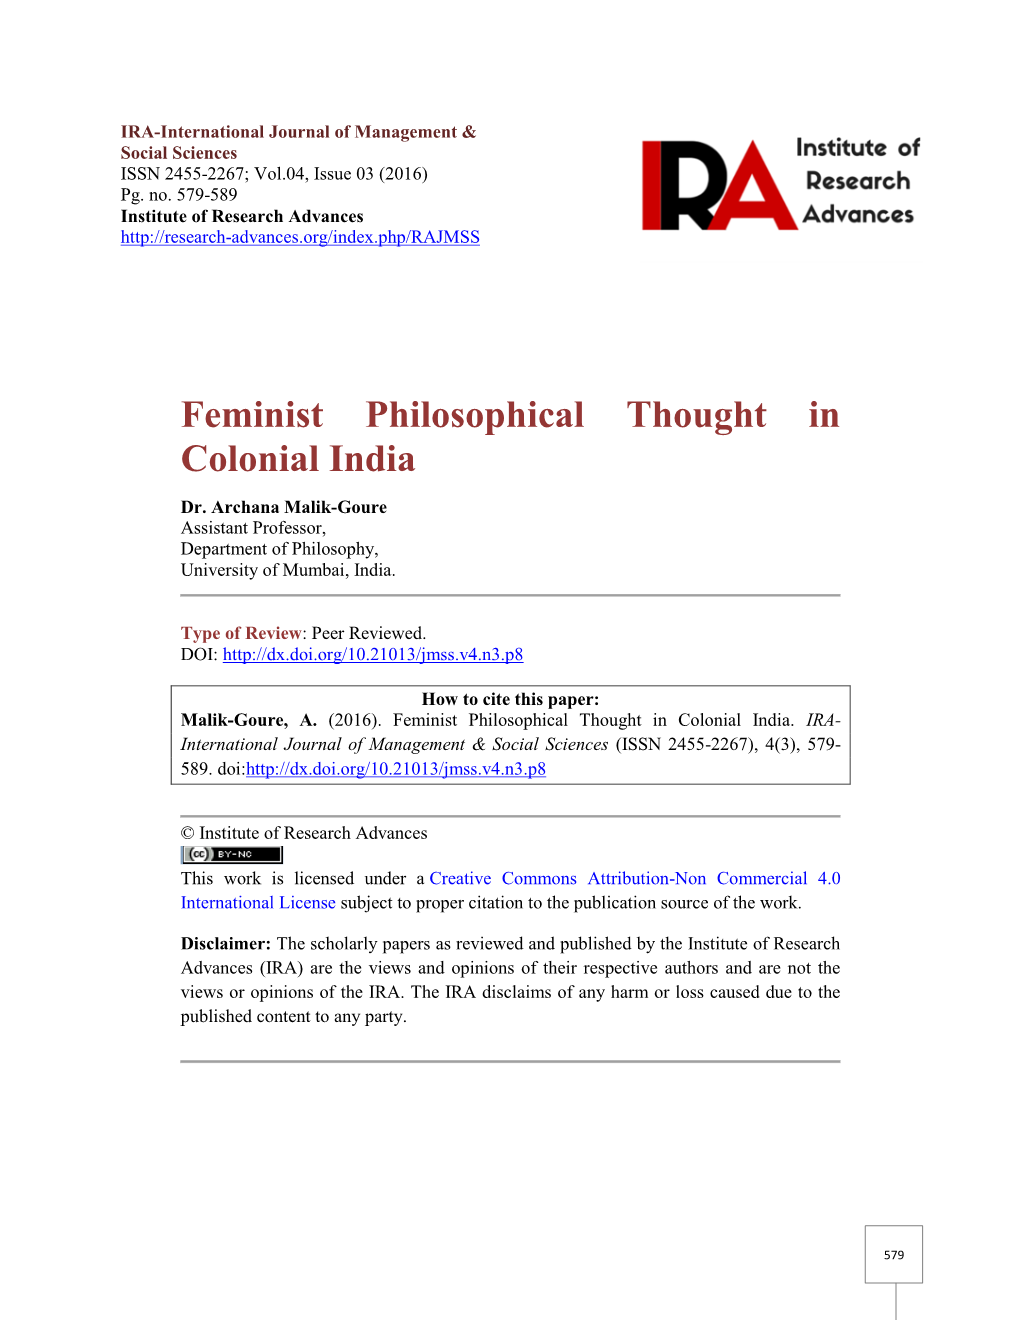 Feminist Philosophical Thought in Colonial India